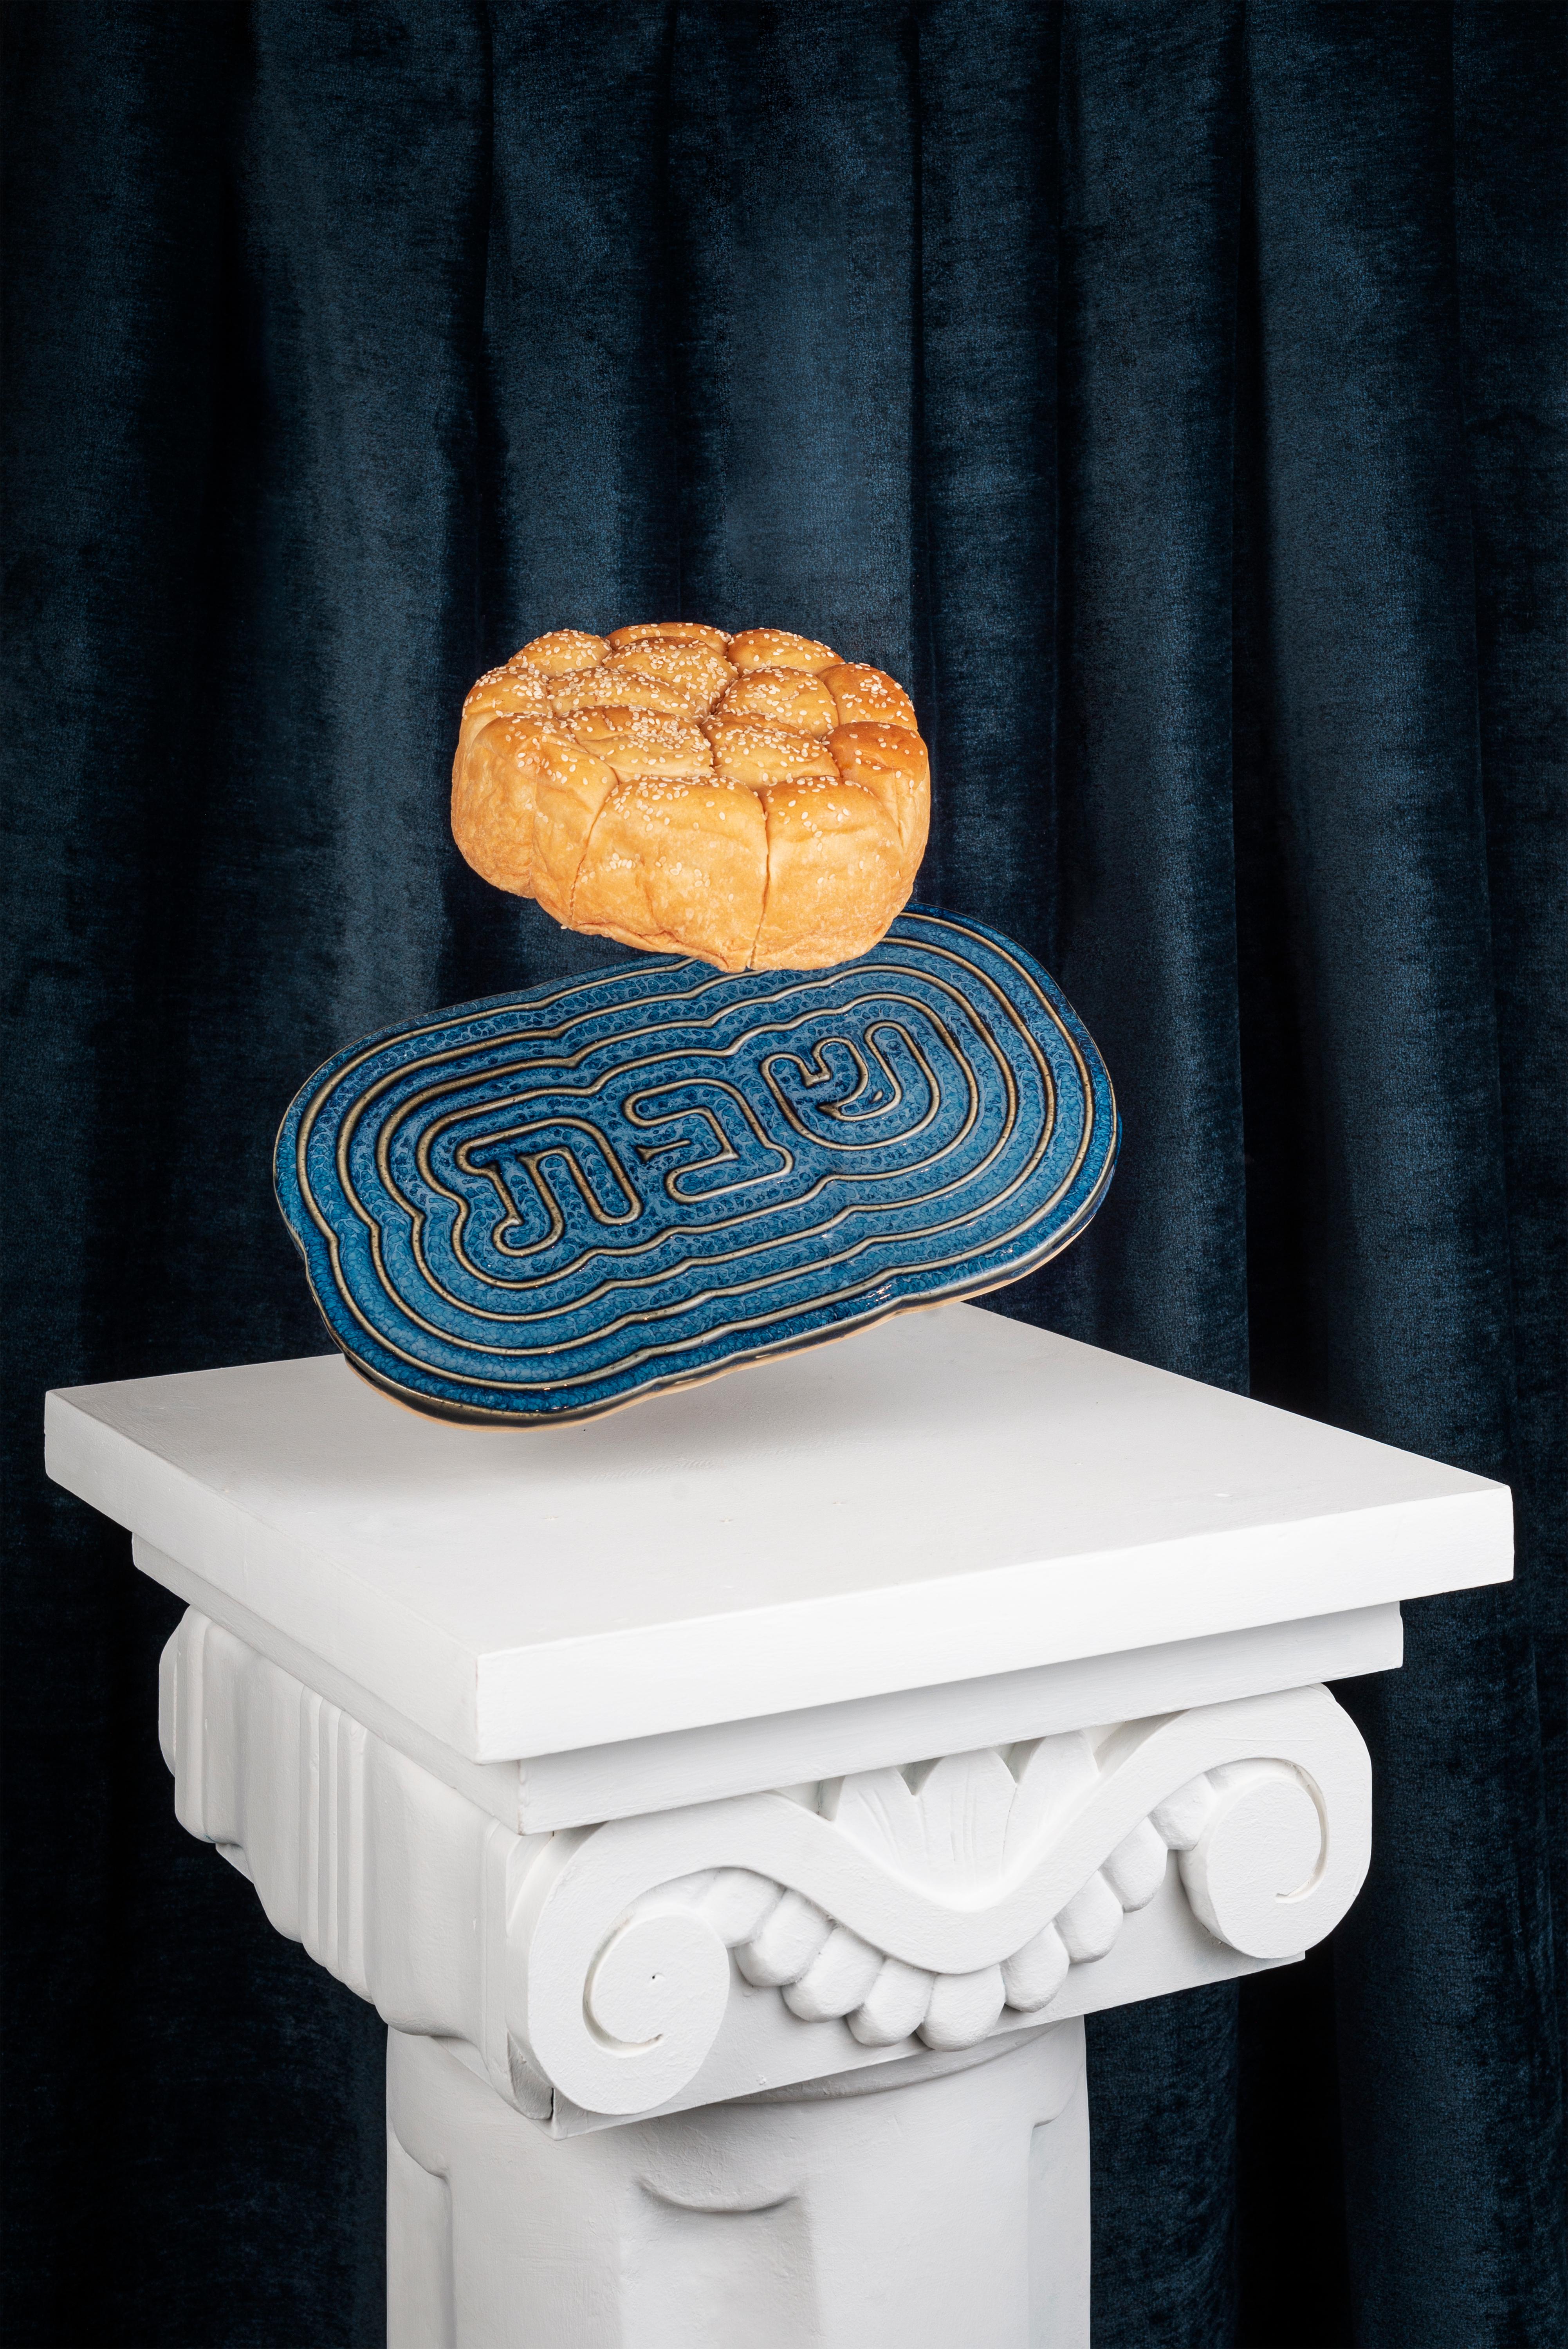 Introducing a masterpiece of Judaic artistry, the Bruci Shabbat Tray is a true testament to the essence of Shabbat. Embodying the timeless Jewish values of creation and light, this exquisite ceramic tray is the perfect way to bring sanctity to your